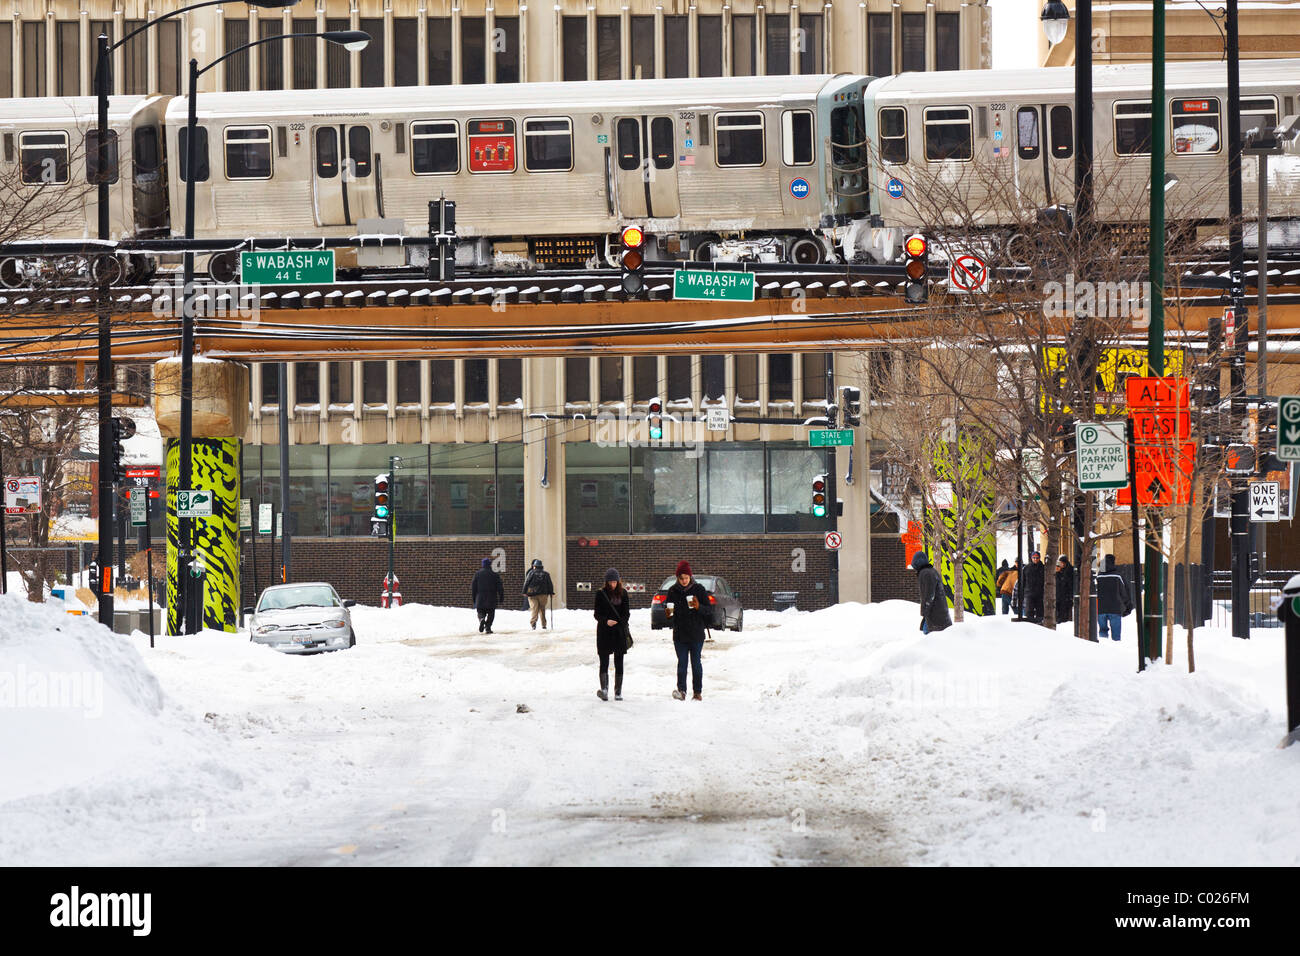 A train passes above Wabash Ave after the 2011 Chicago Blizzard Stock Photo